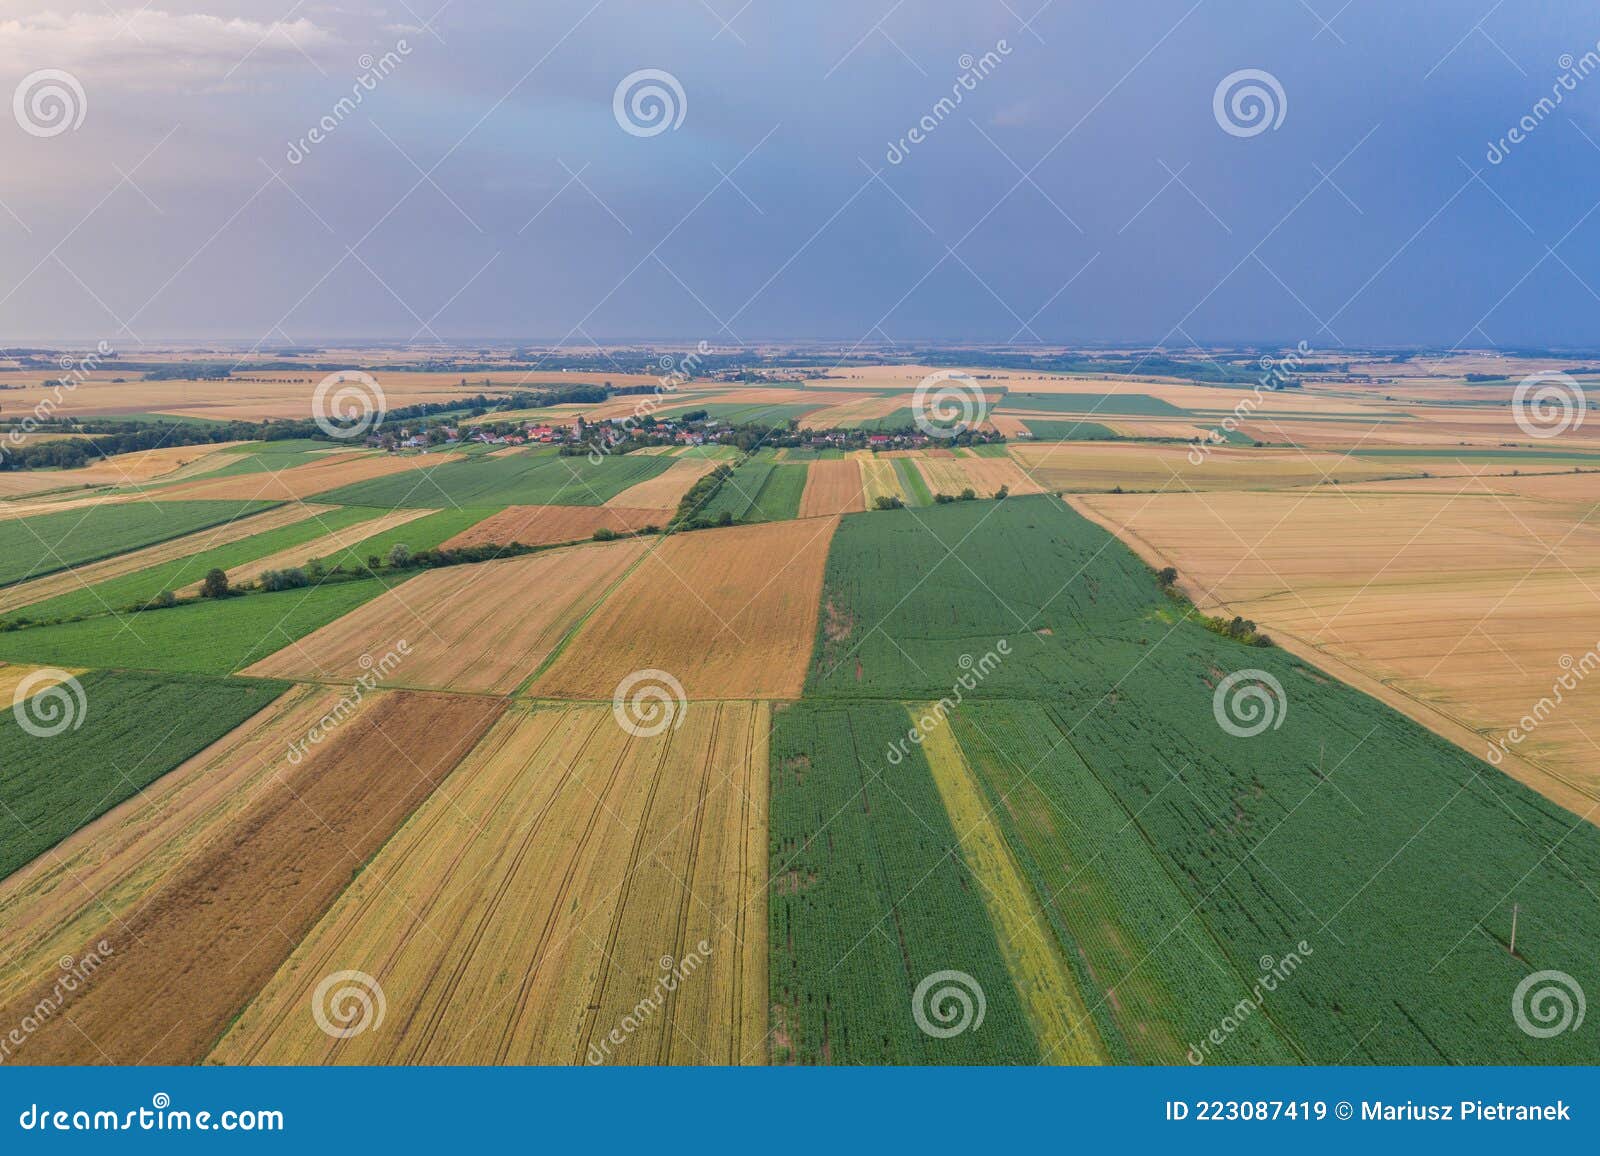 Storm in the Countryside. Village from Drone Aerial View. Beautiful ...